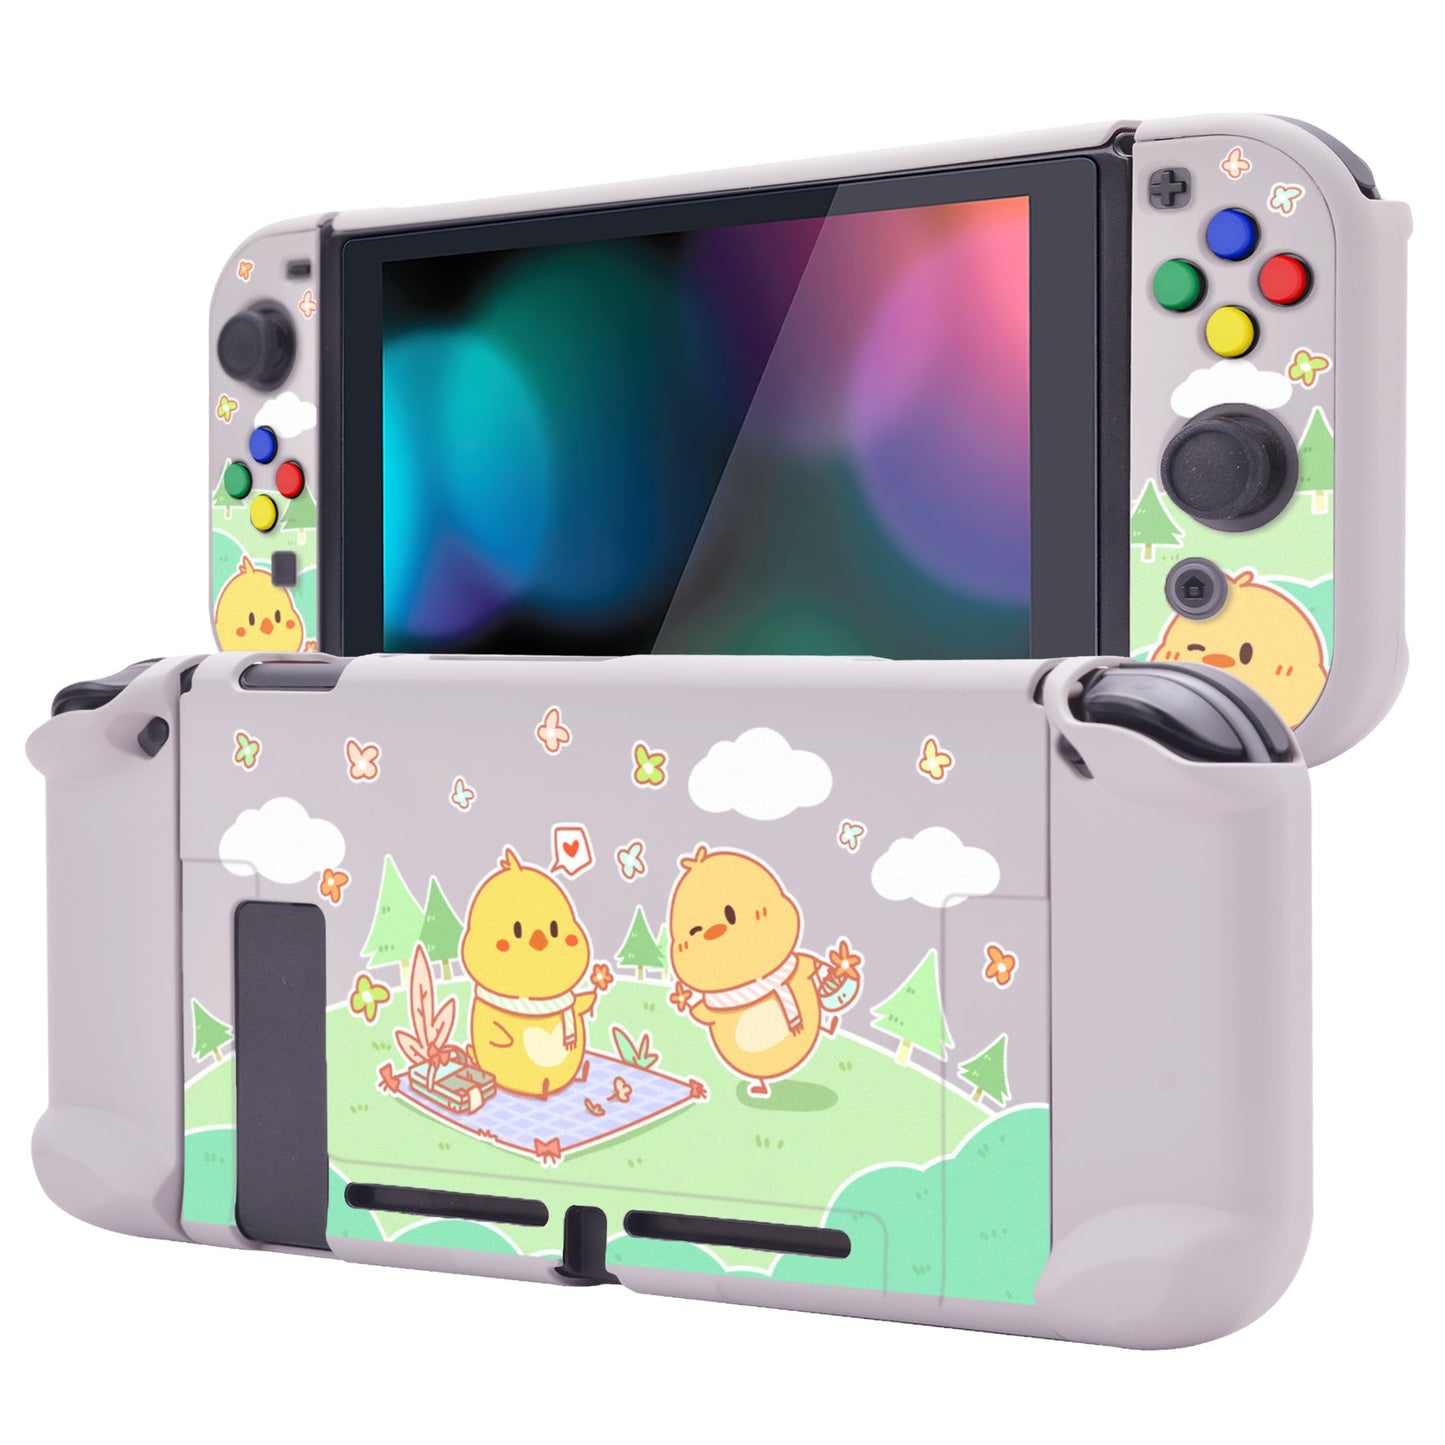 PlayVital Picnic Fair Back Cover for NS Switch Console, NS Joycon Handheld Controller Separable Protector Hard Shell, Dockable Protective Case with Colorful ABXY Direction Button Caps - NTT119 PlayVital